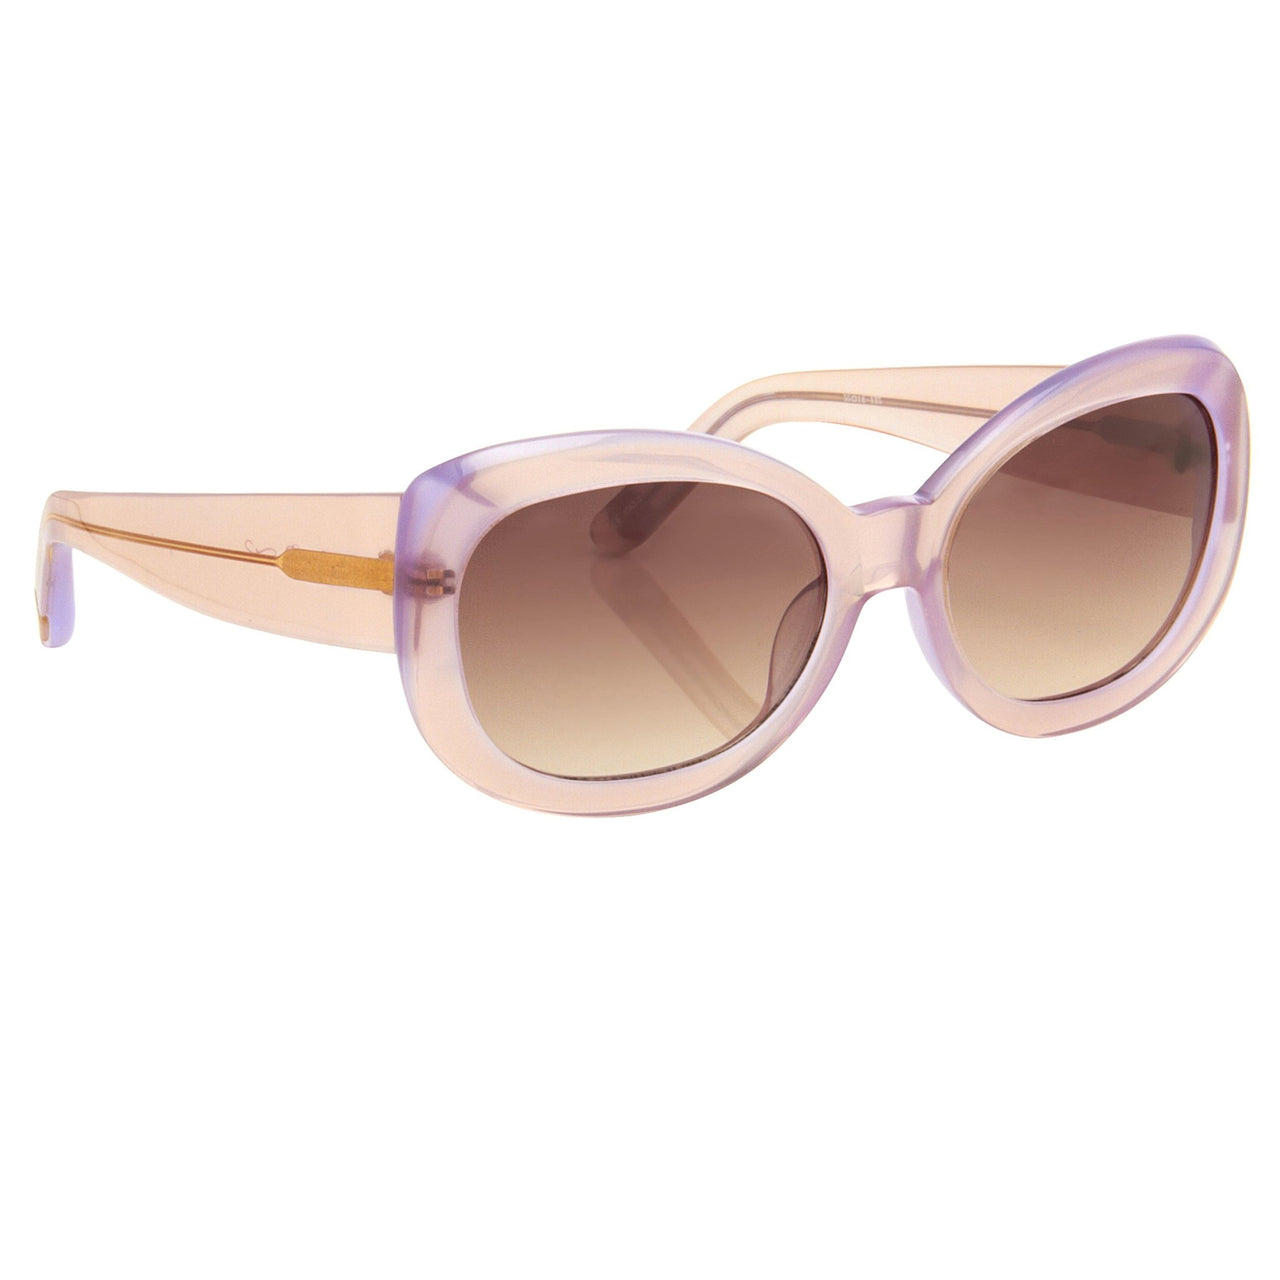 Agent Provocateur Sunglasses Round Beige and Brown Lenses - AP57C4SUN - Watches & Crystals